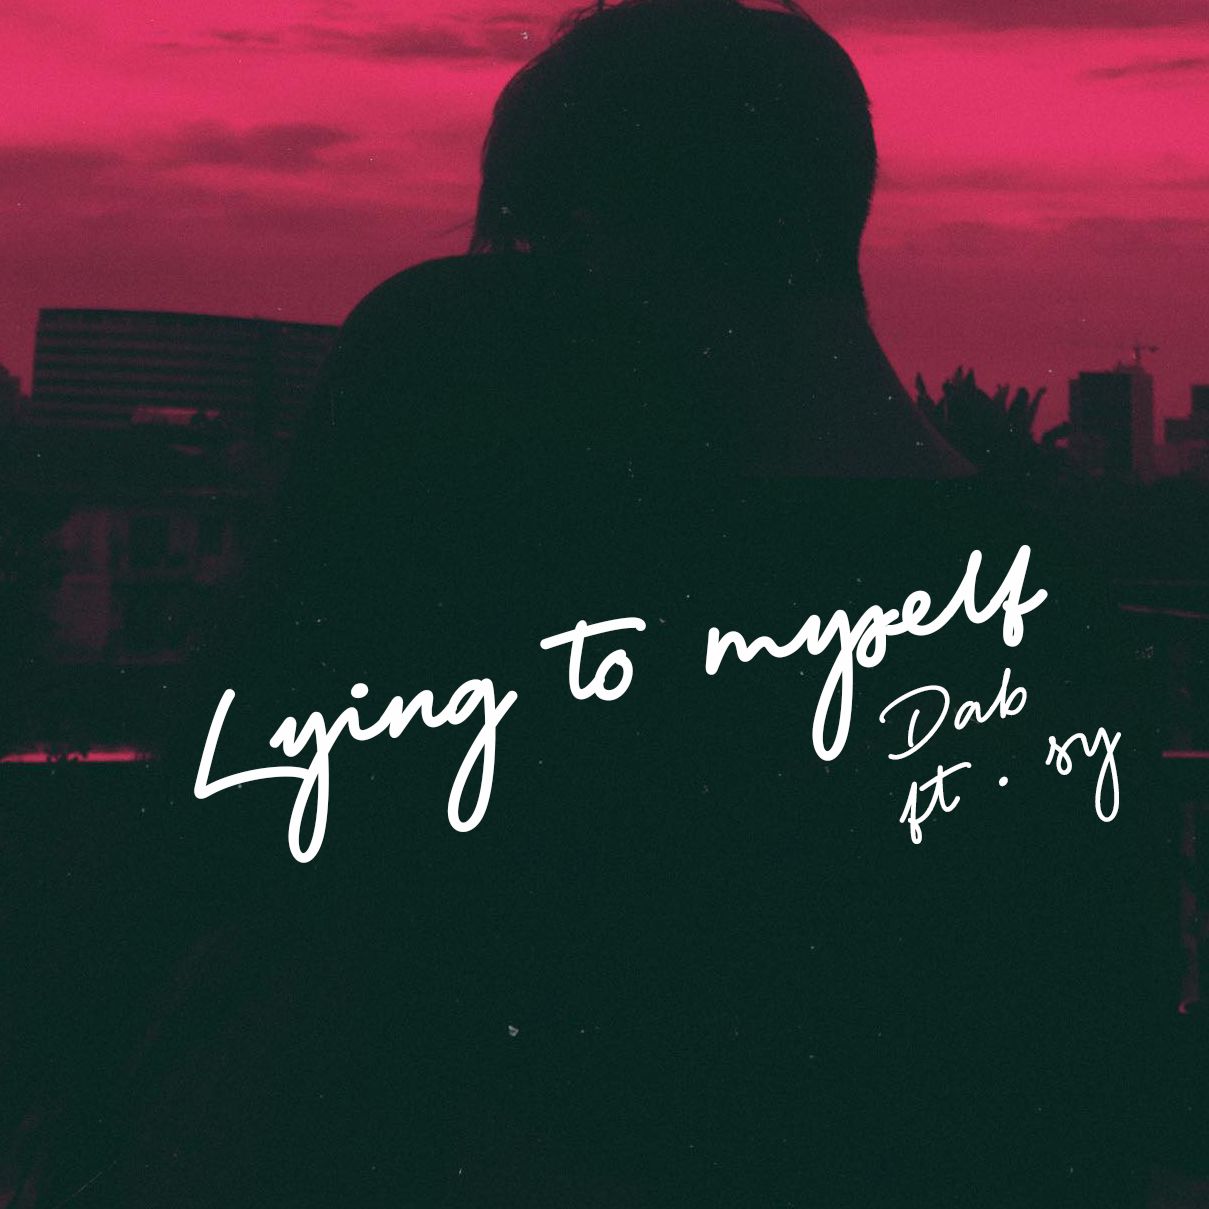 Download Dab - Lying to myself (feat. sy)